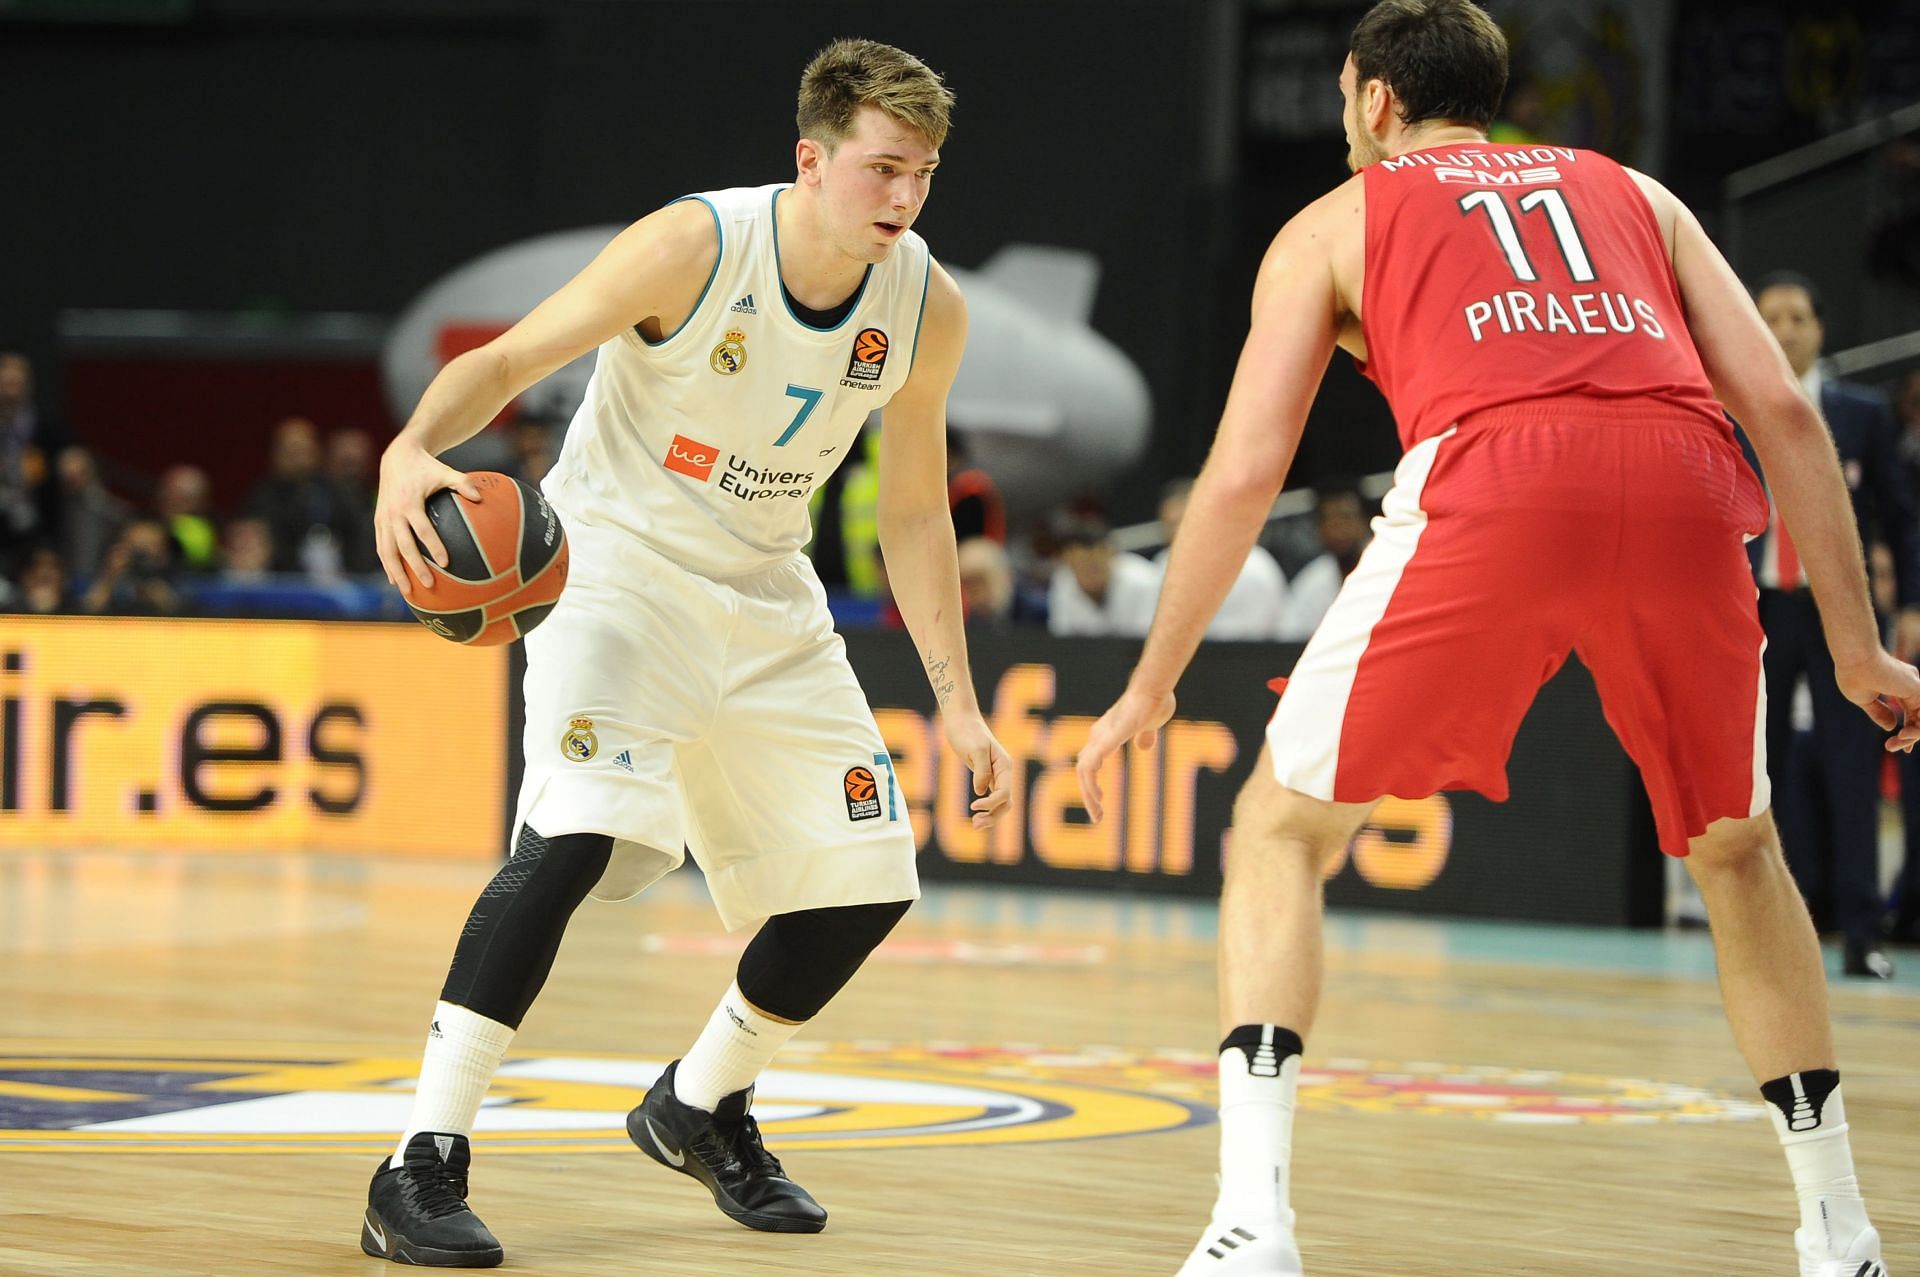 Luka Doncic playing for Real Madrid.